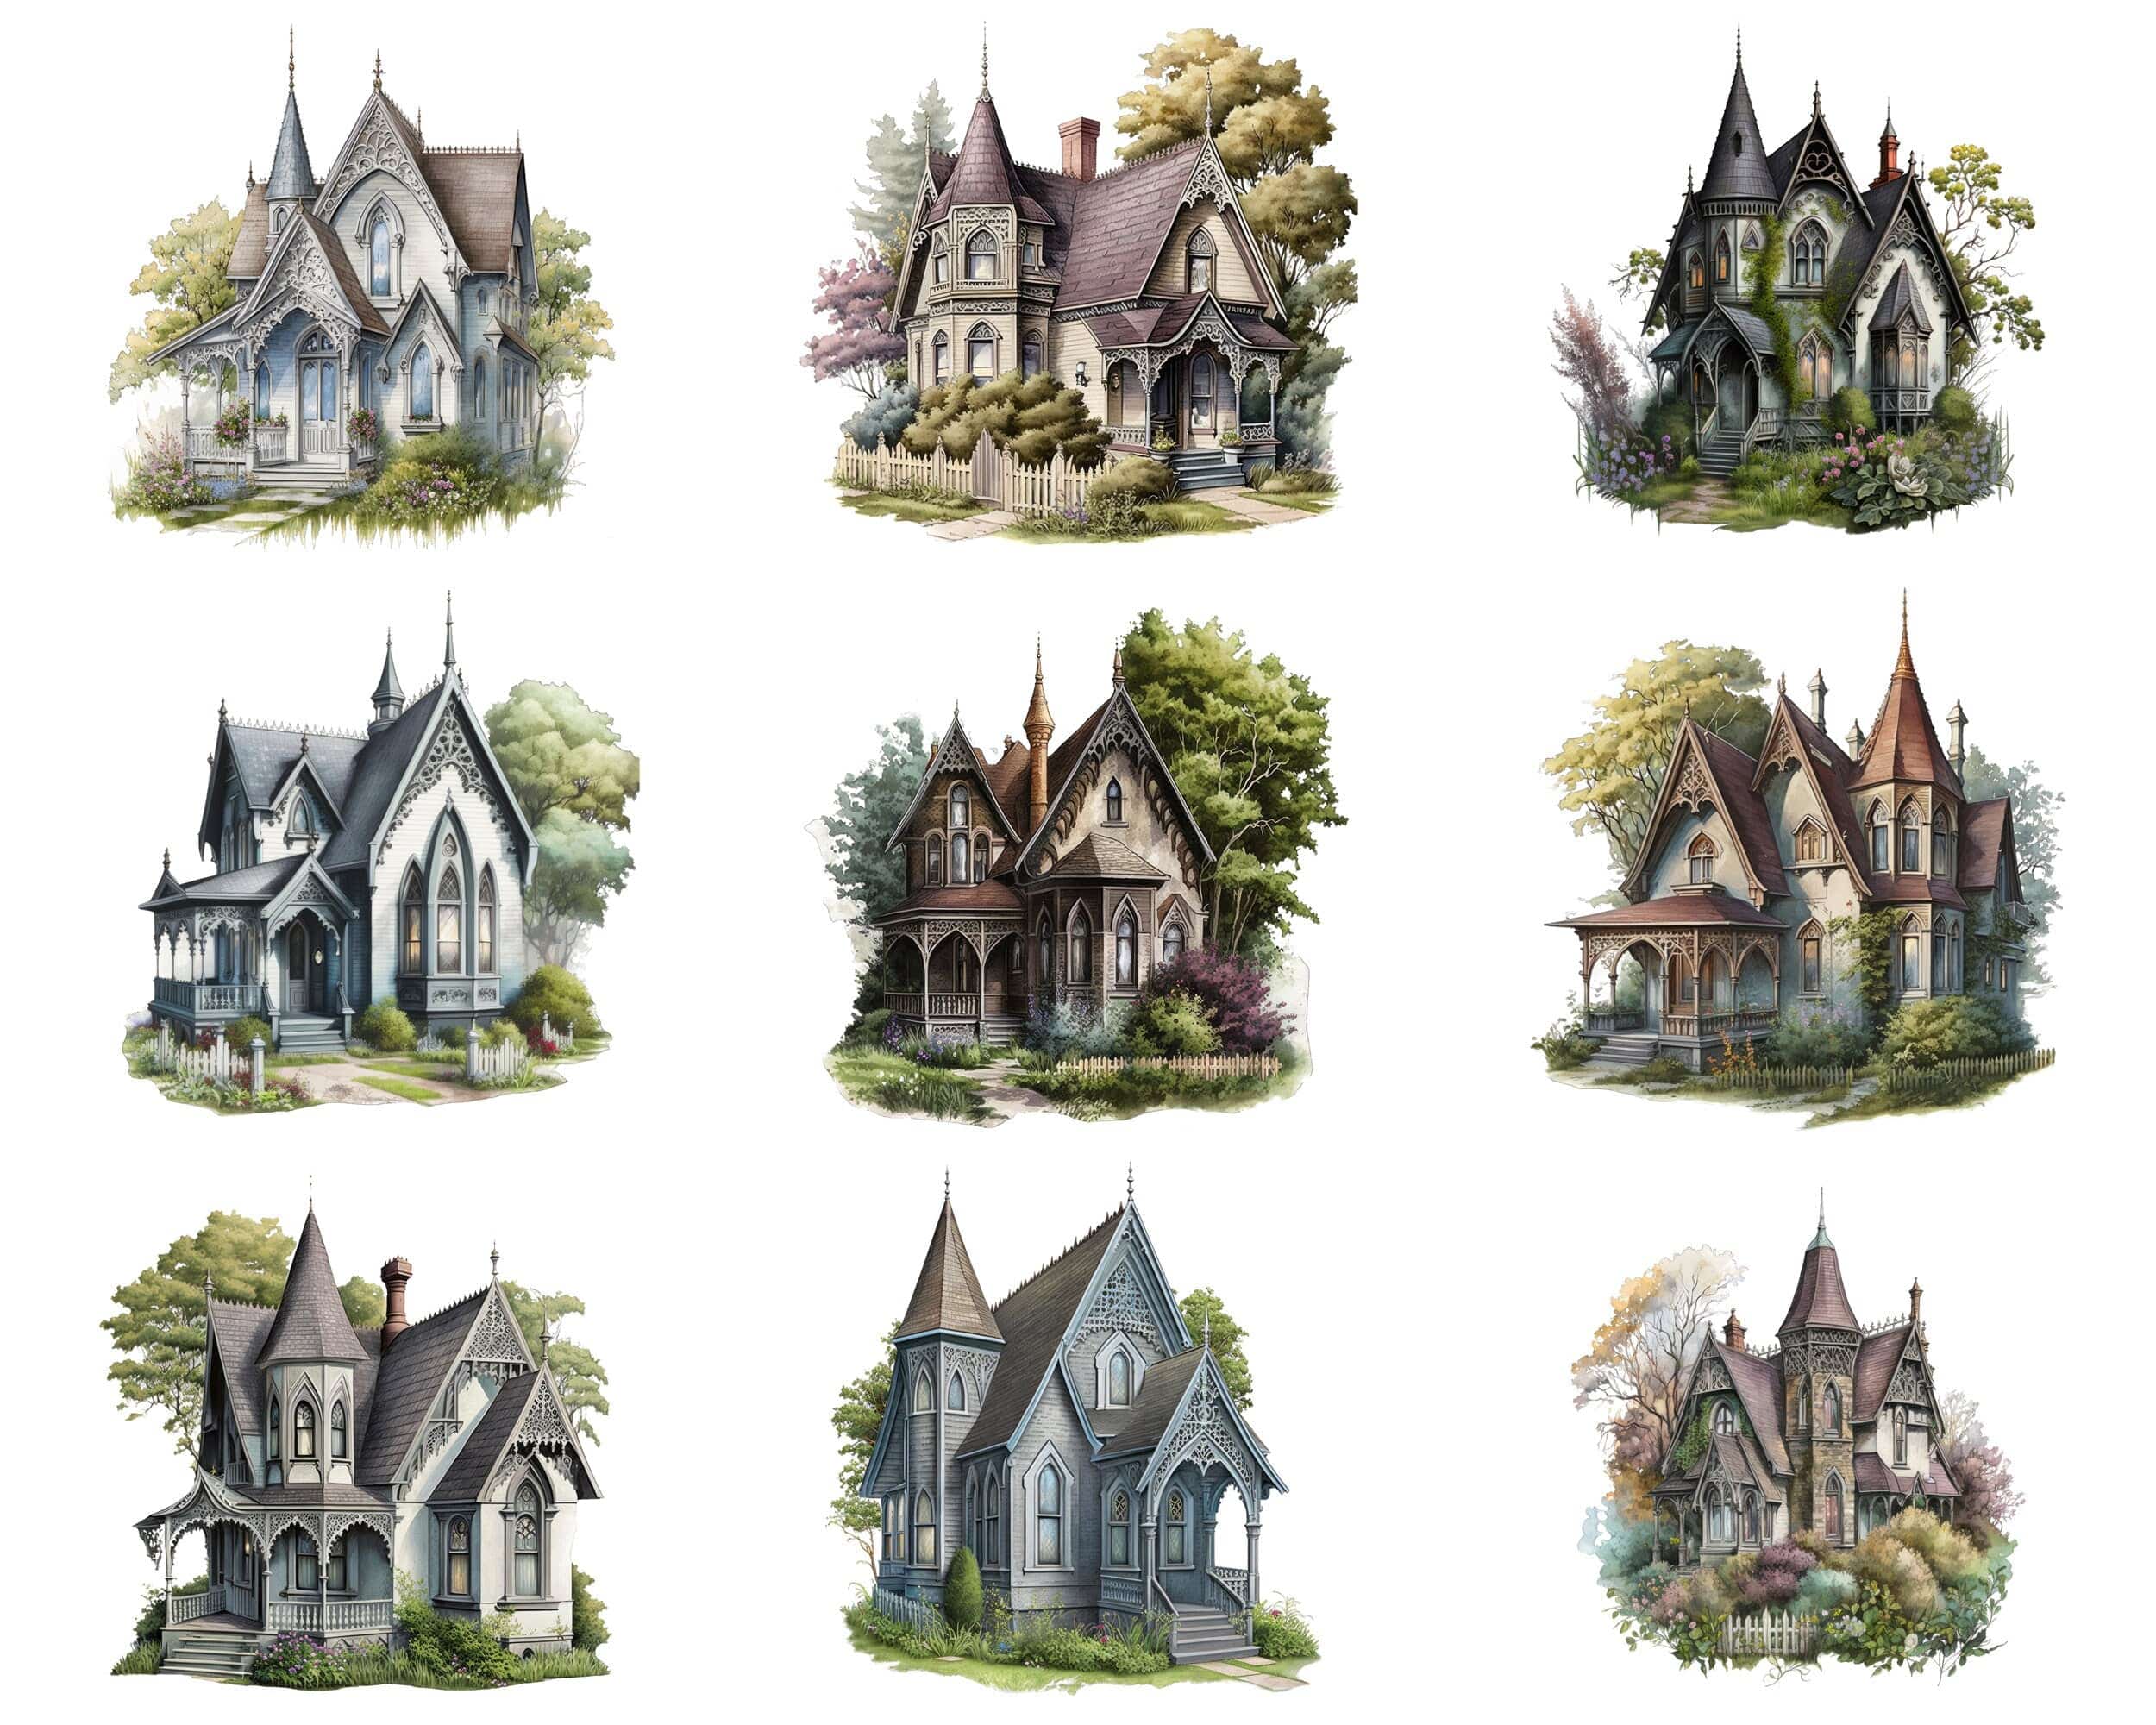 Bundle of 69 Gothic Houses and Cottages - Transparent Digital Images - Vintage-Inspired, Darkly Romantic PNG Clipart Collection for Crafting Digital Download Sumobundle